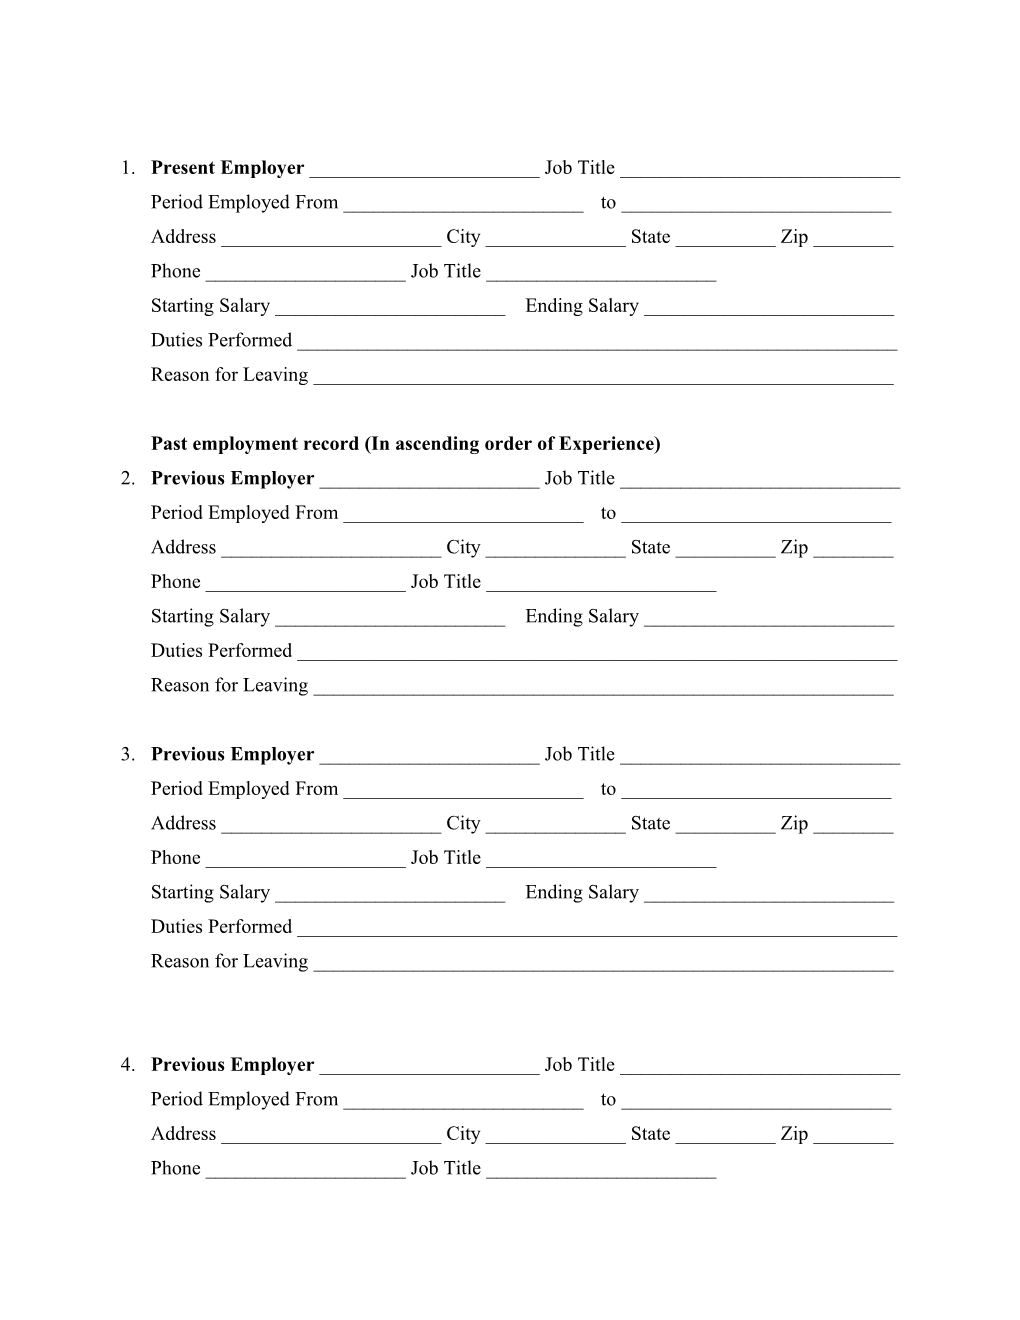 Application for Employment s50